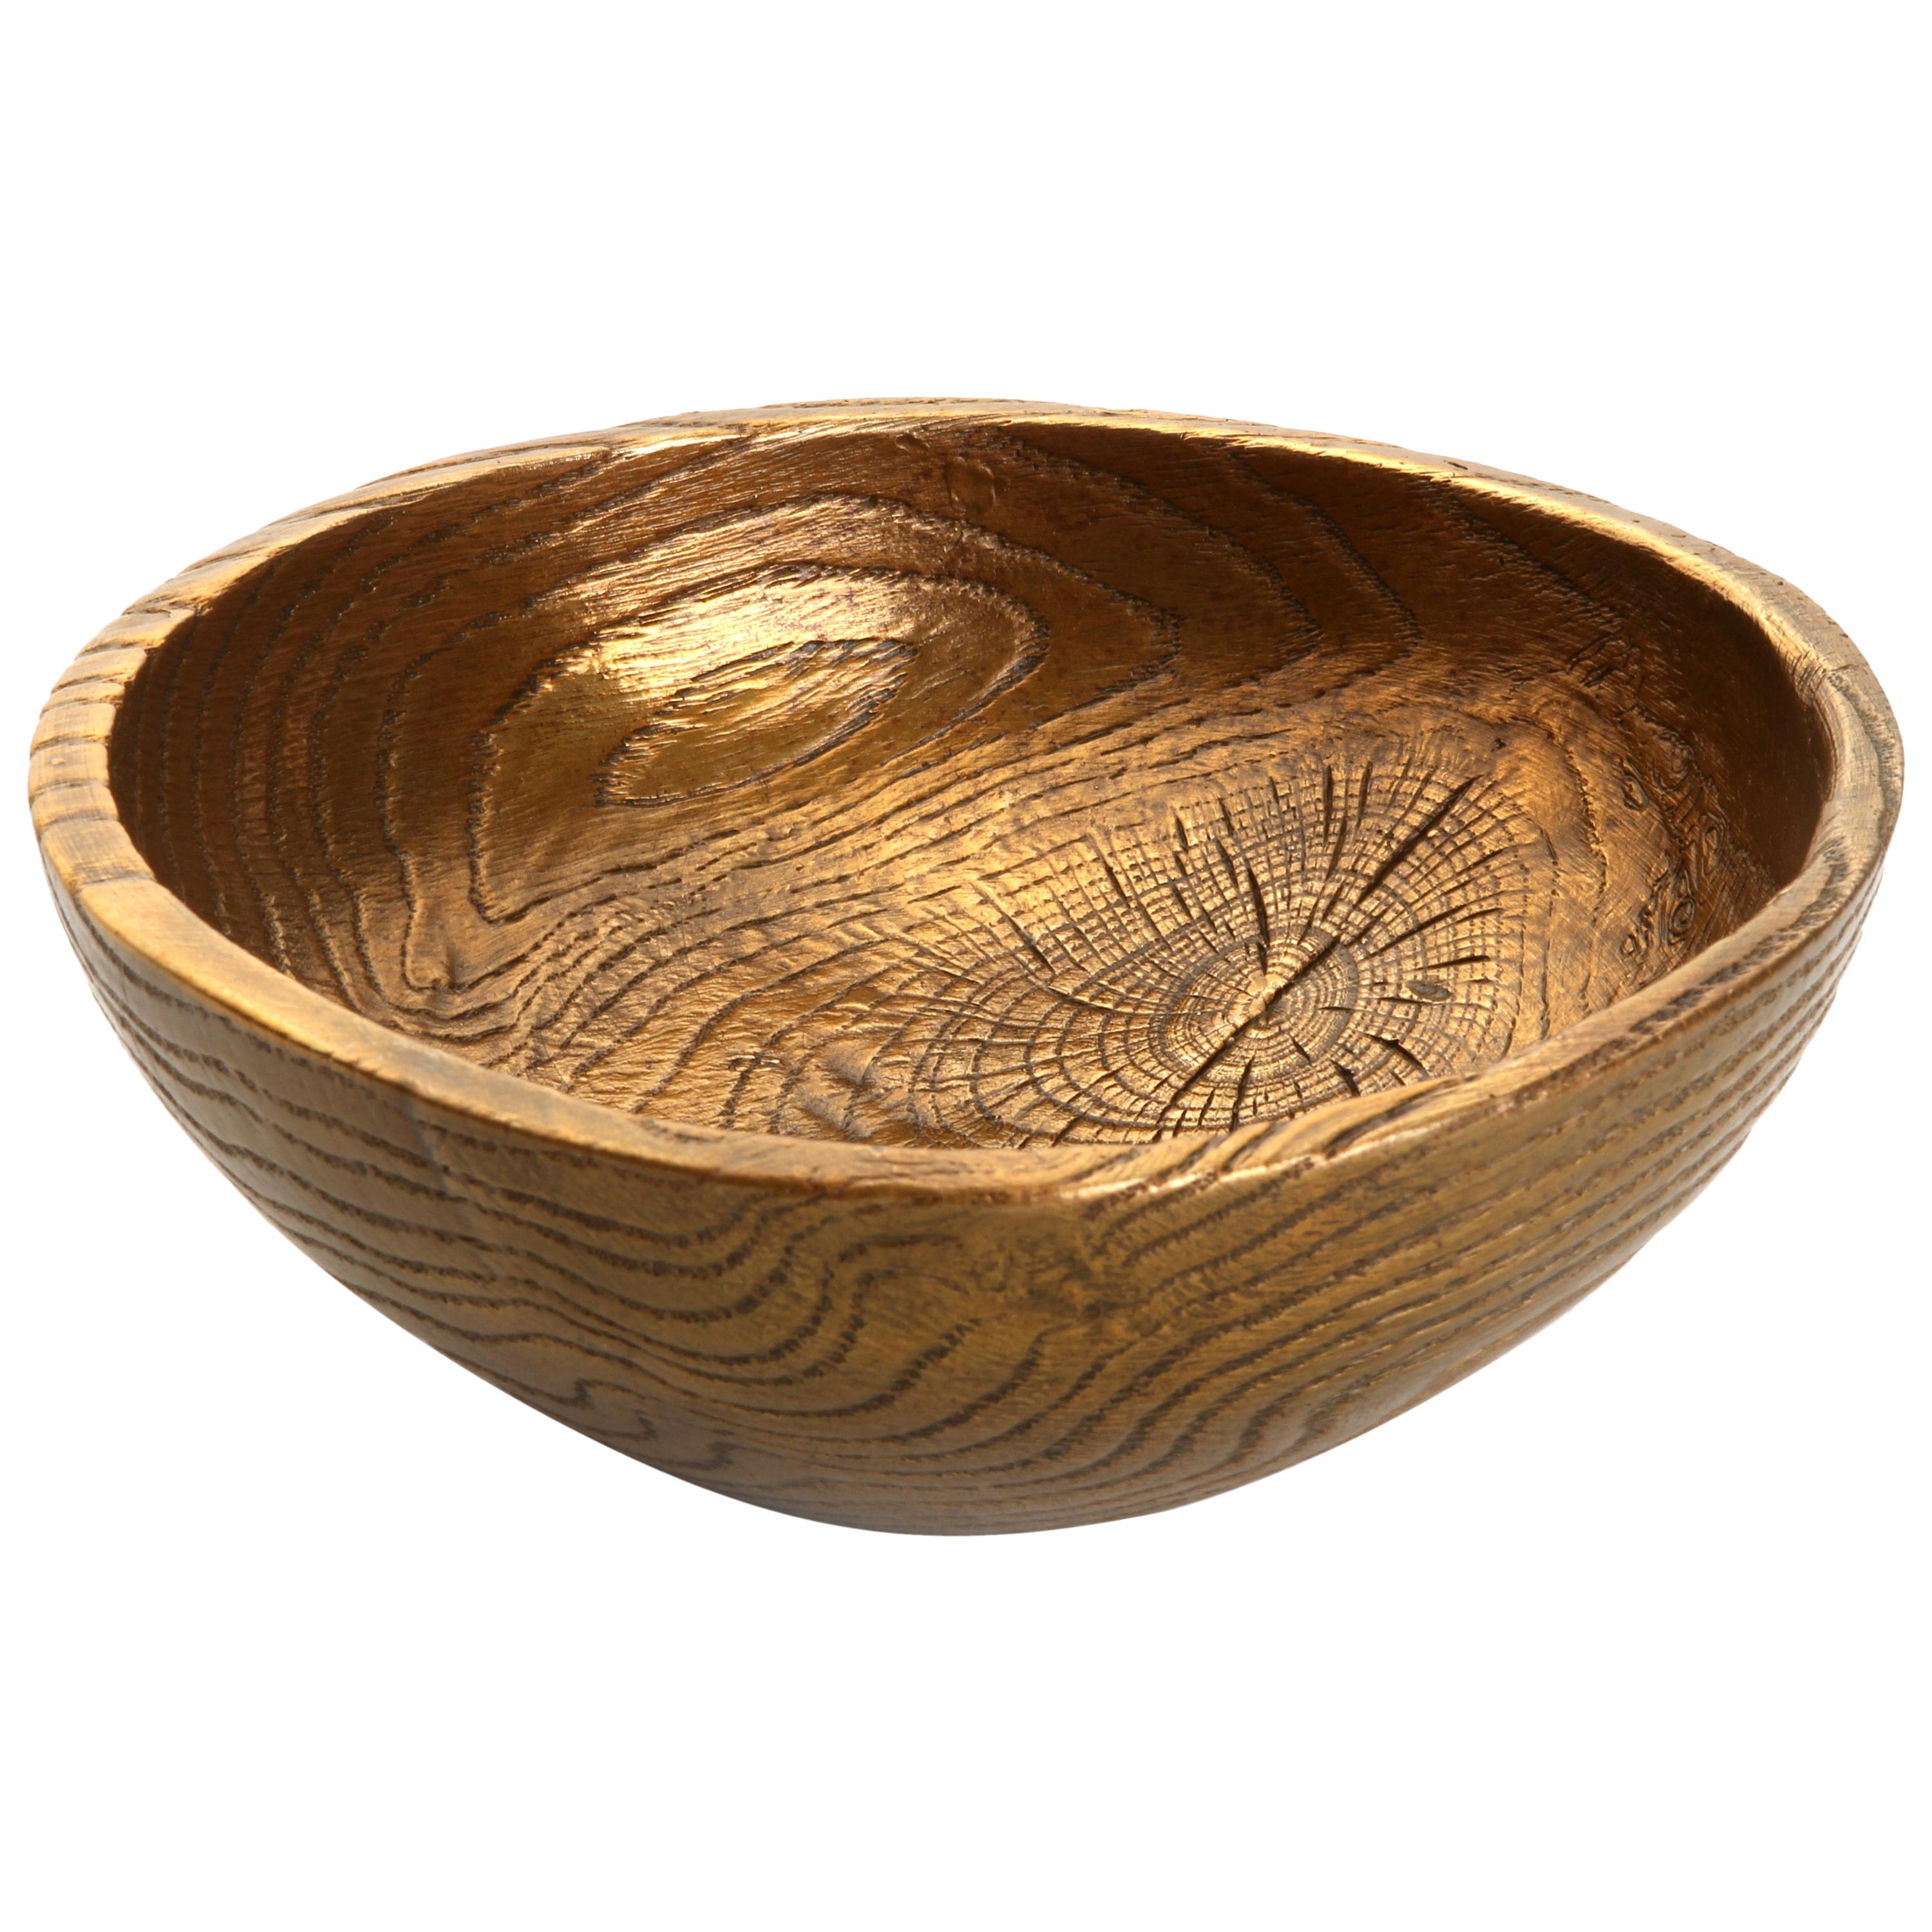 Solid Bronze "Flora" Bowl / Catchall with Wood Texture and Gold Bronze Patina For Sale